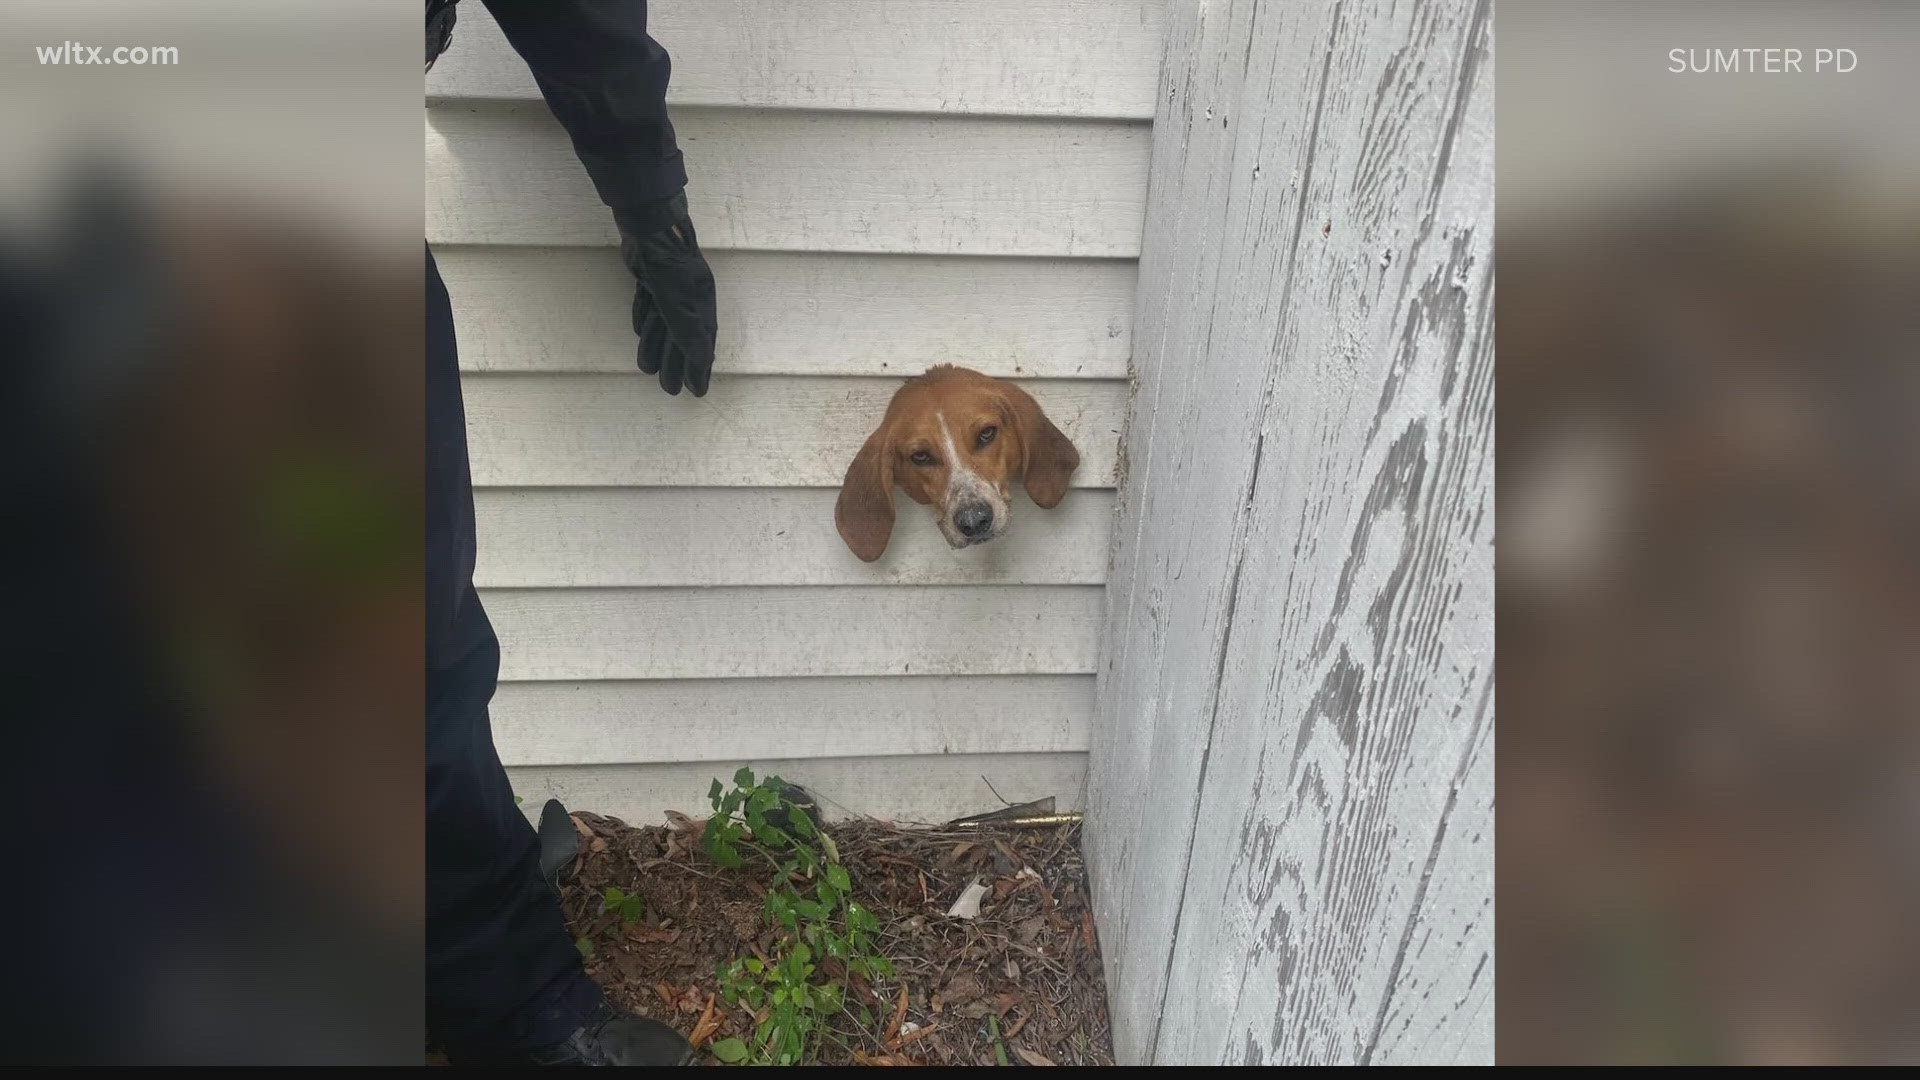 Spike the foxhound had to be rescued in Sumter when he got his head stuck in a dryer vent.   He is ok and understand he'll be sleeping in the doghouse tonight.